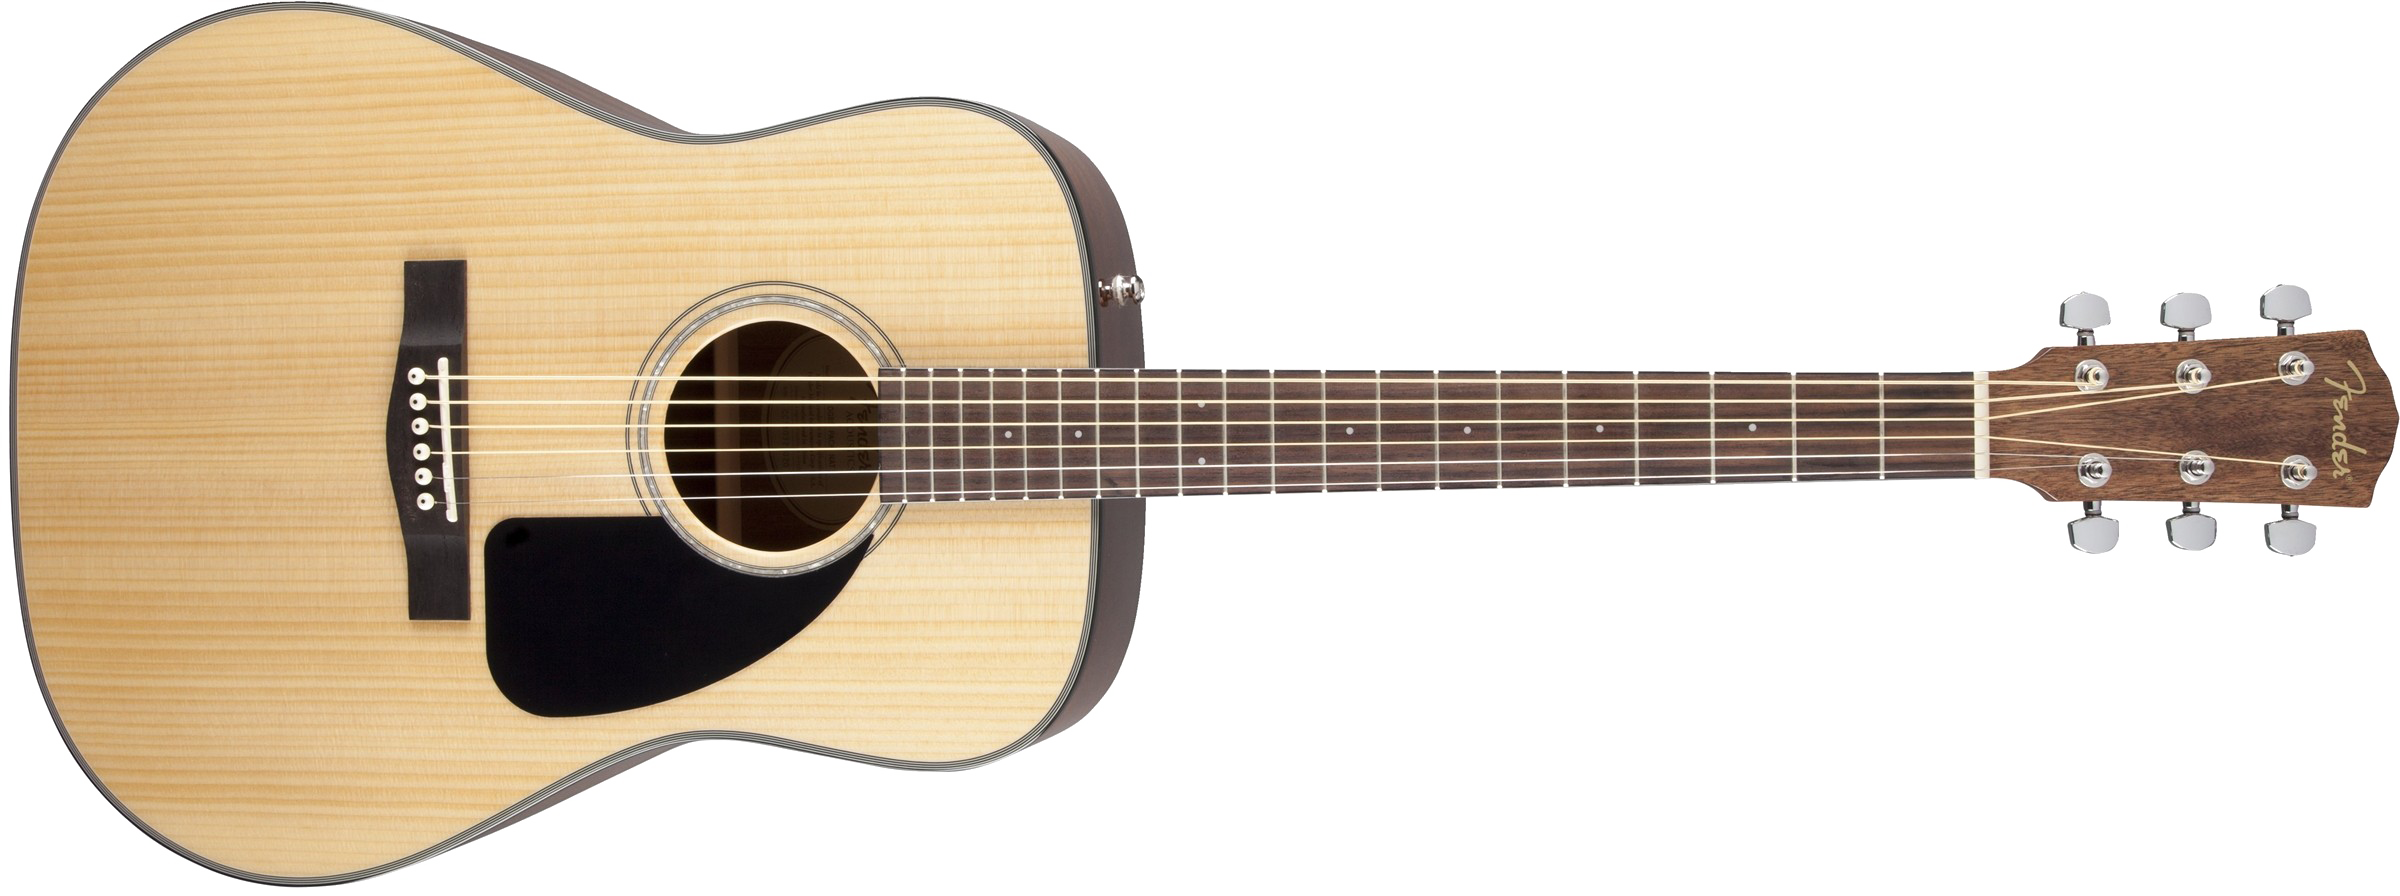 Wooden Acoustic Guitar Free Download PNG HD PNG Image